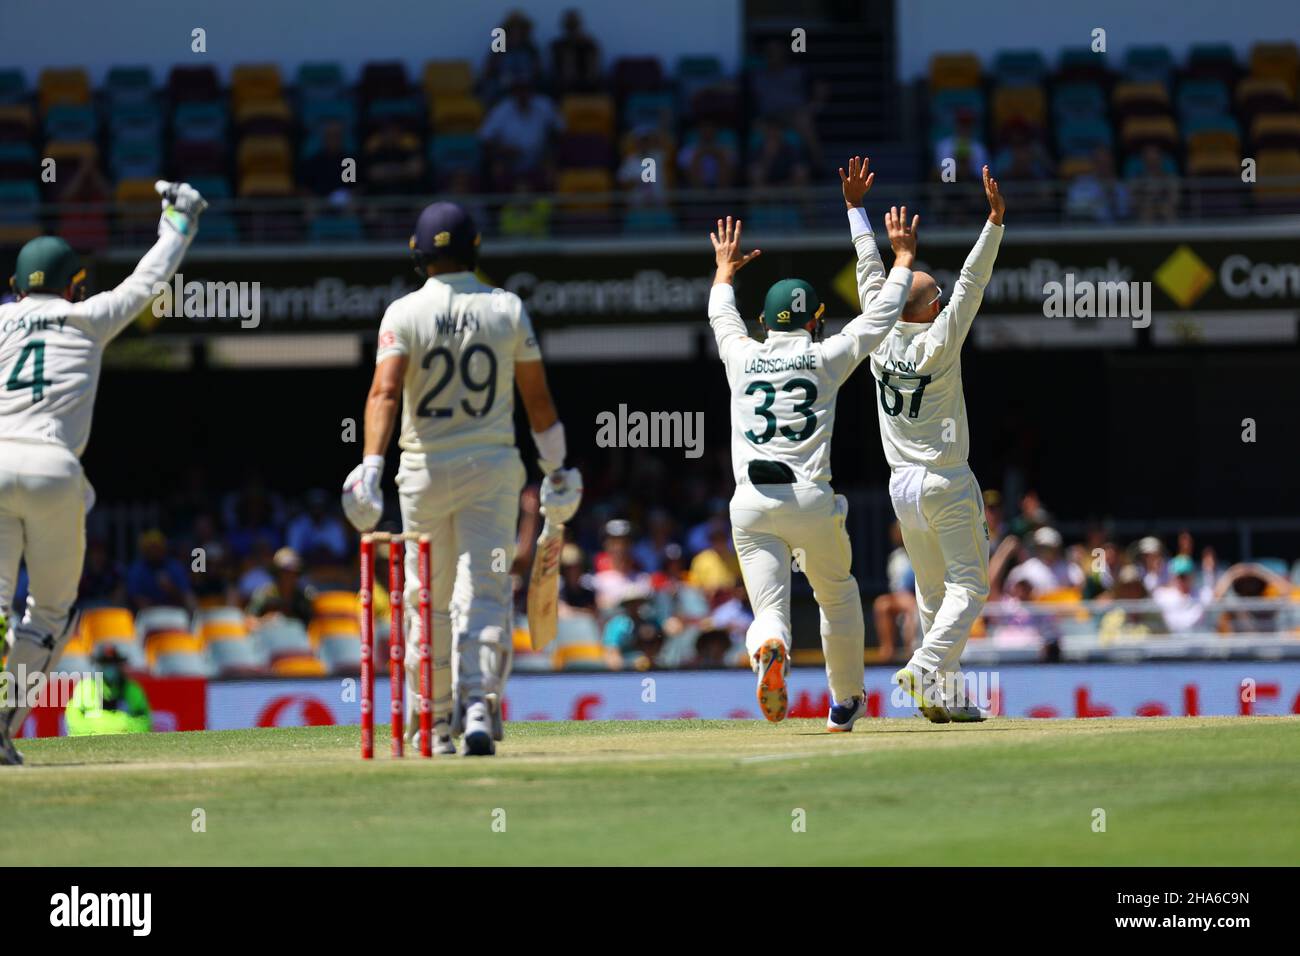 Nathan Lyon of Australia dismisses Dawid Malan of England and claims his 400th wicket Stock Photo